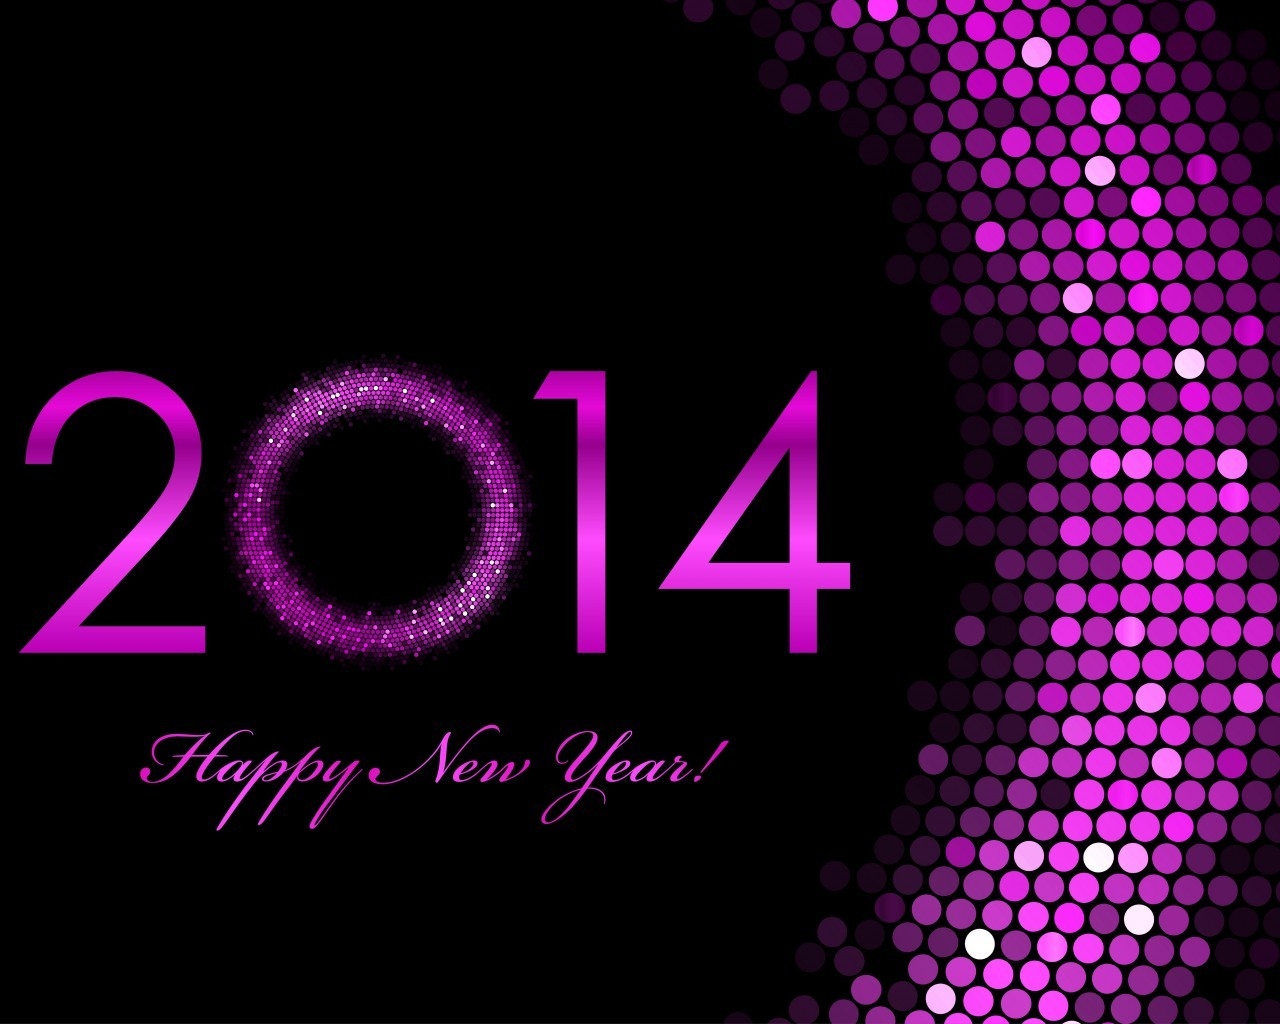 2014 Happy New Year for 1280 x 1024 resolution